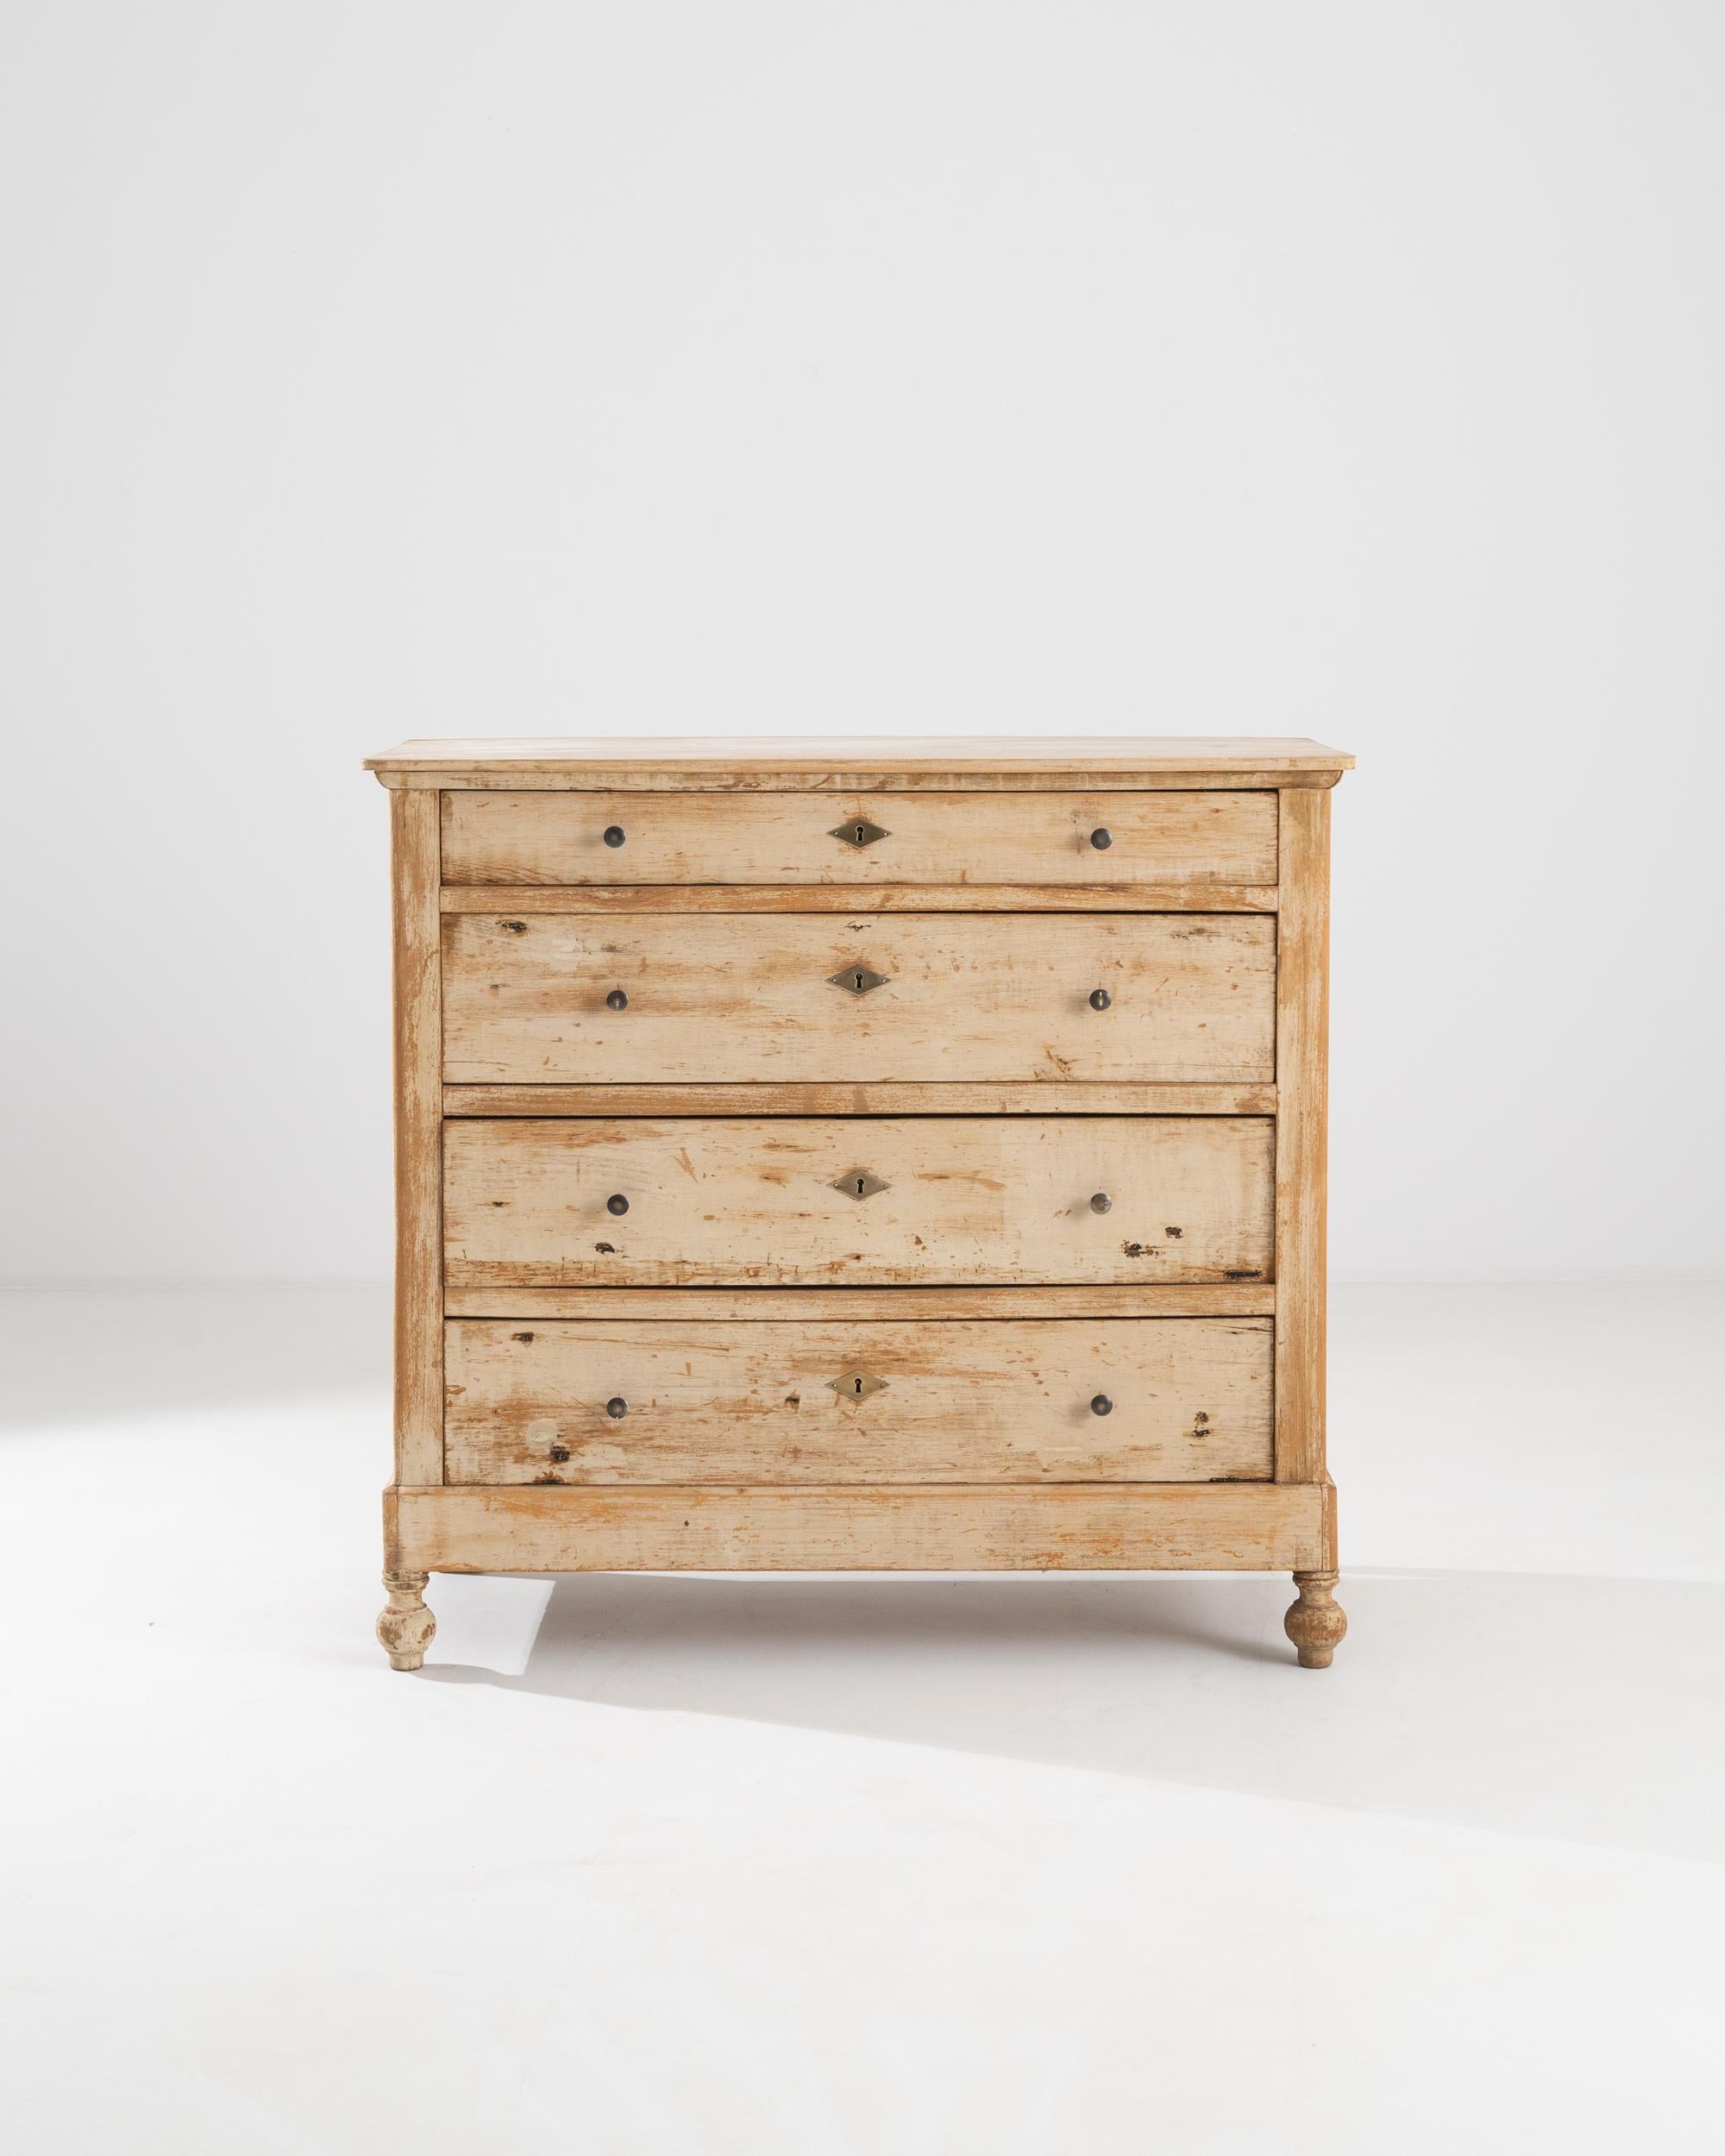 A wooden chest of drawers from 19th century France. A bright and time-etched patina, as well as exposed wood knots and grain details enliven this chest with a rustic cheer. However, carefully lathed feet, smartly fit diamond keyholes, and an